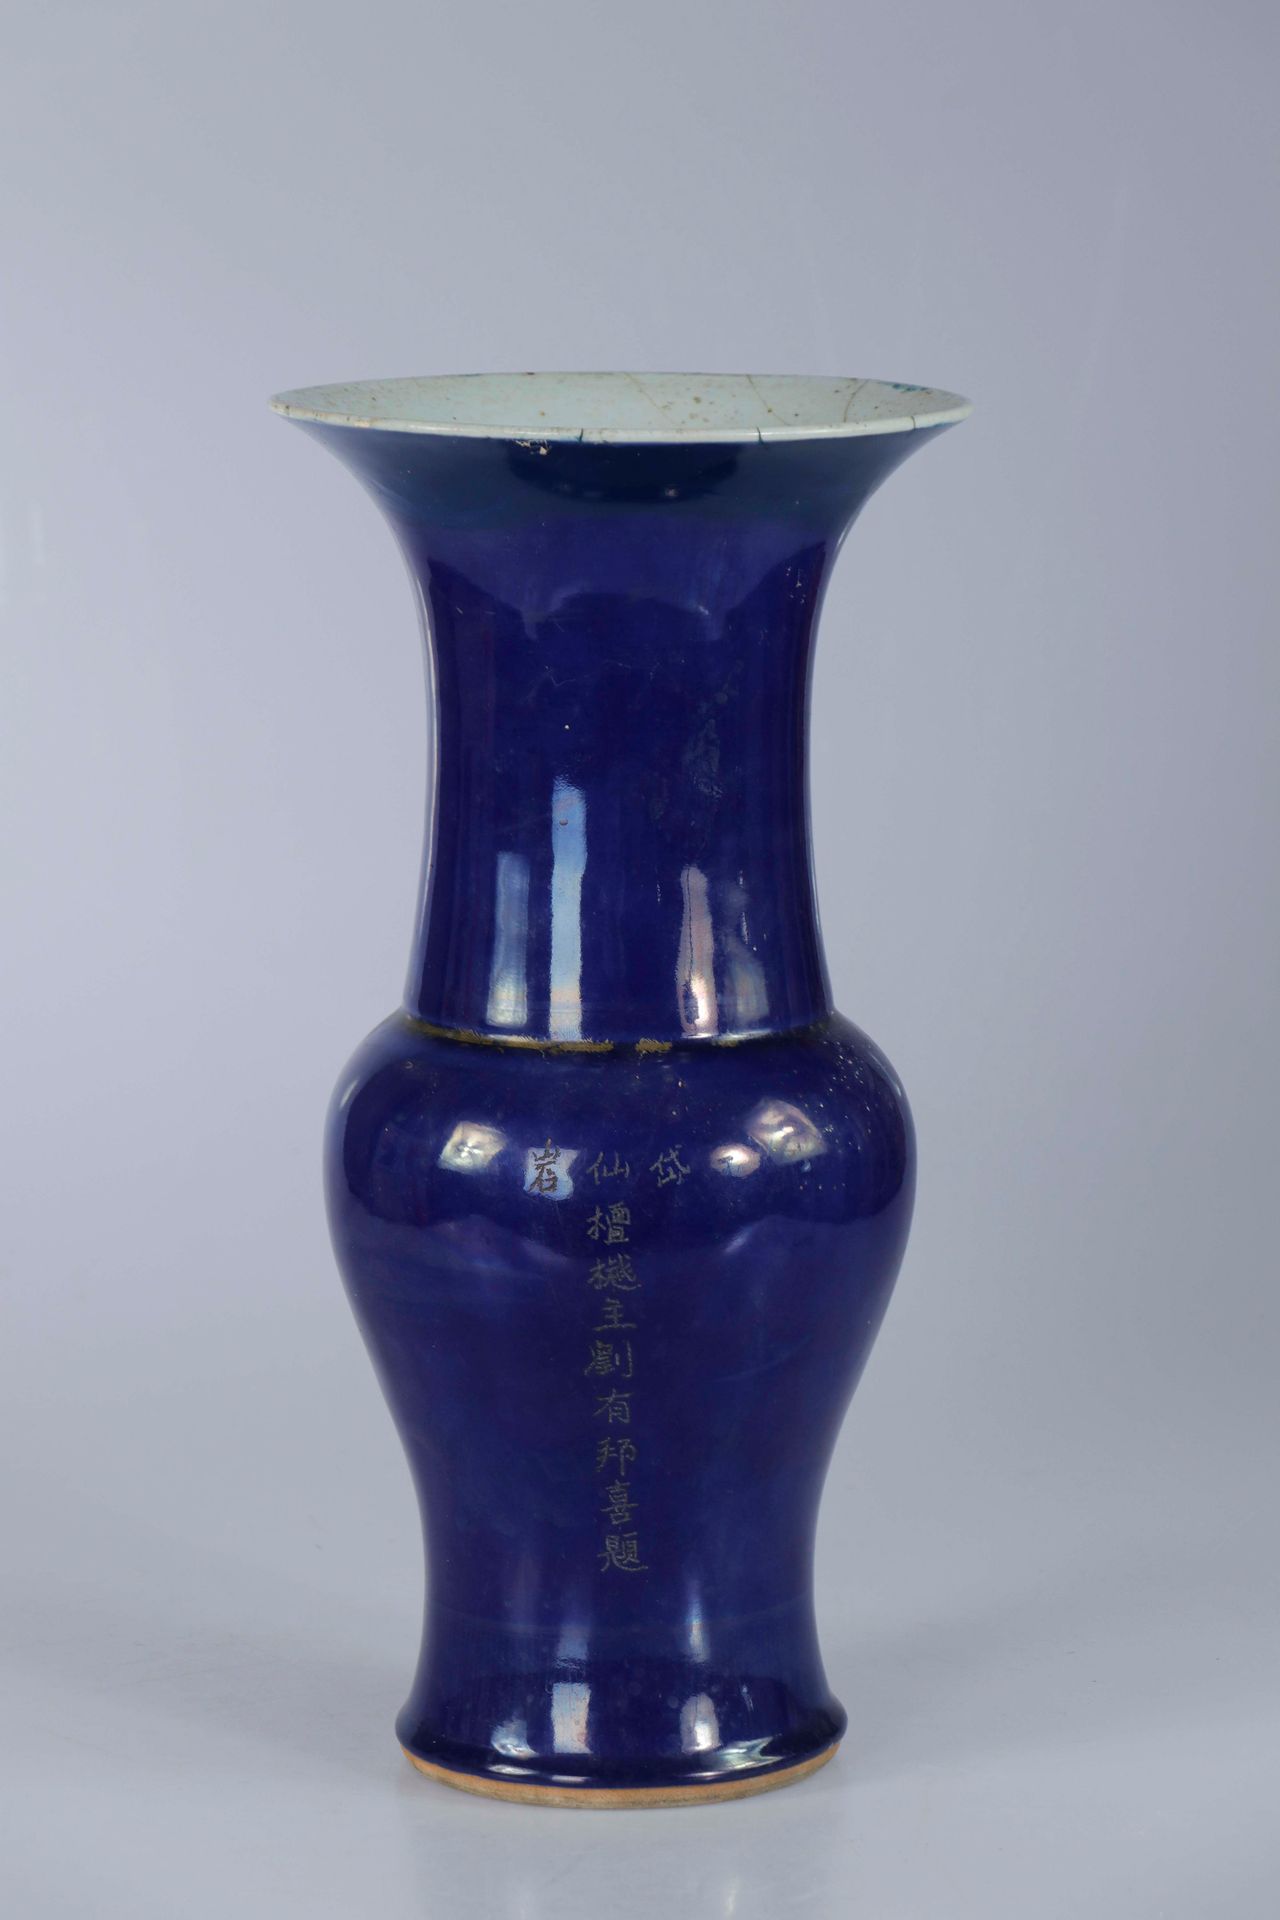 Null CHINA, 18th century. Vase of yen yen form in monochrome blue porcelain with&hellip;